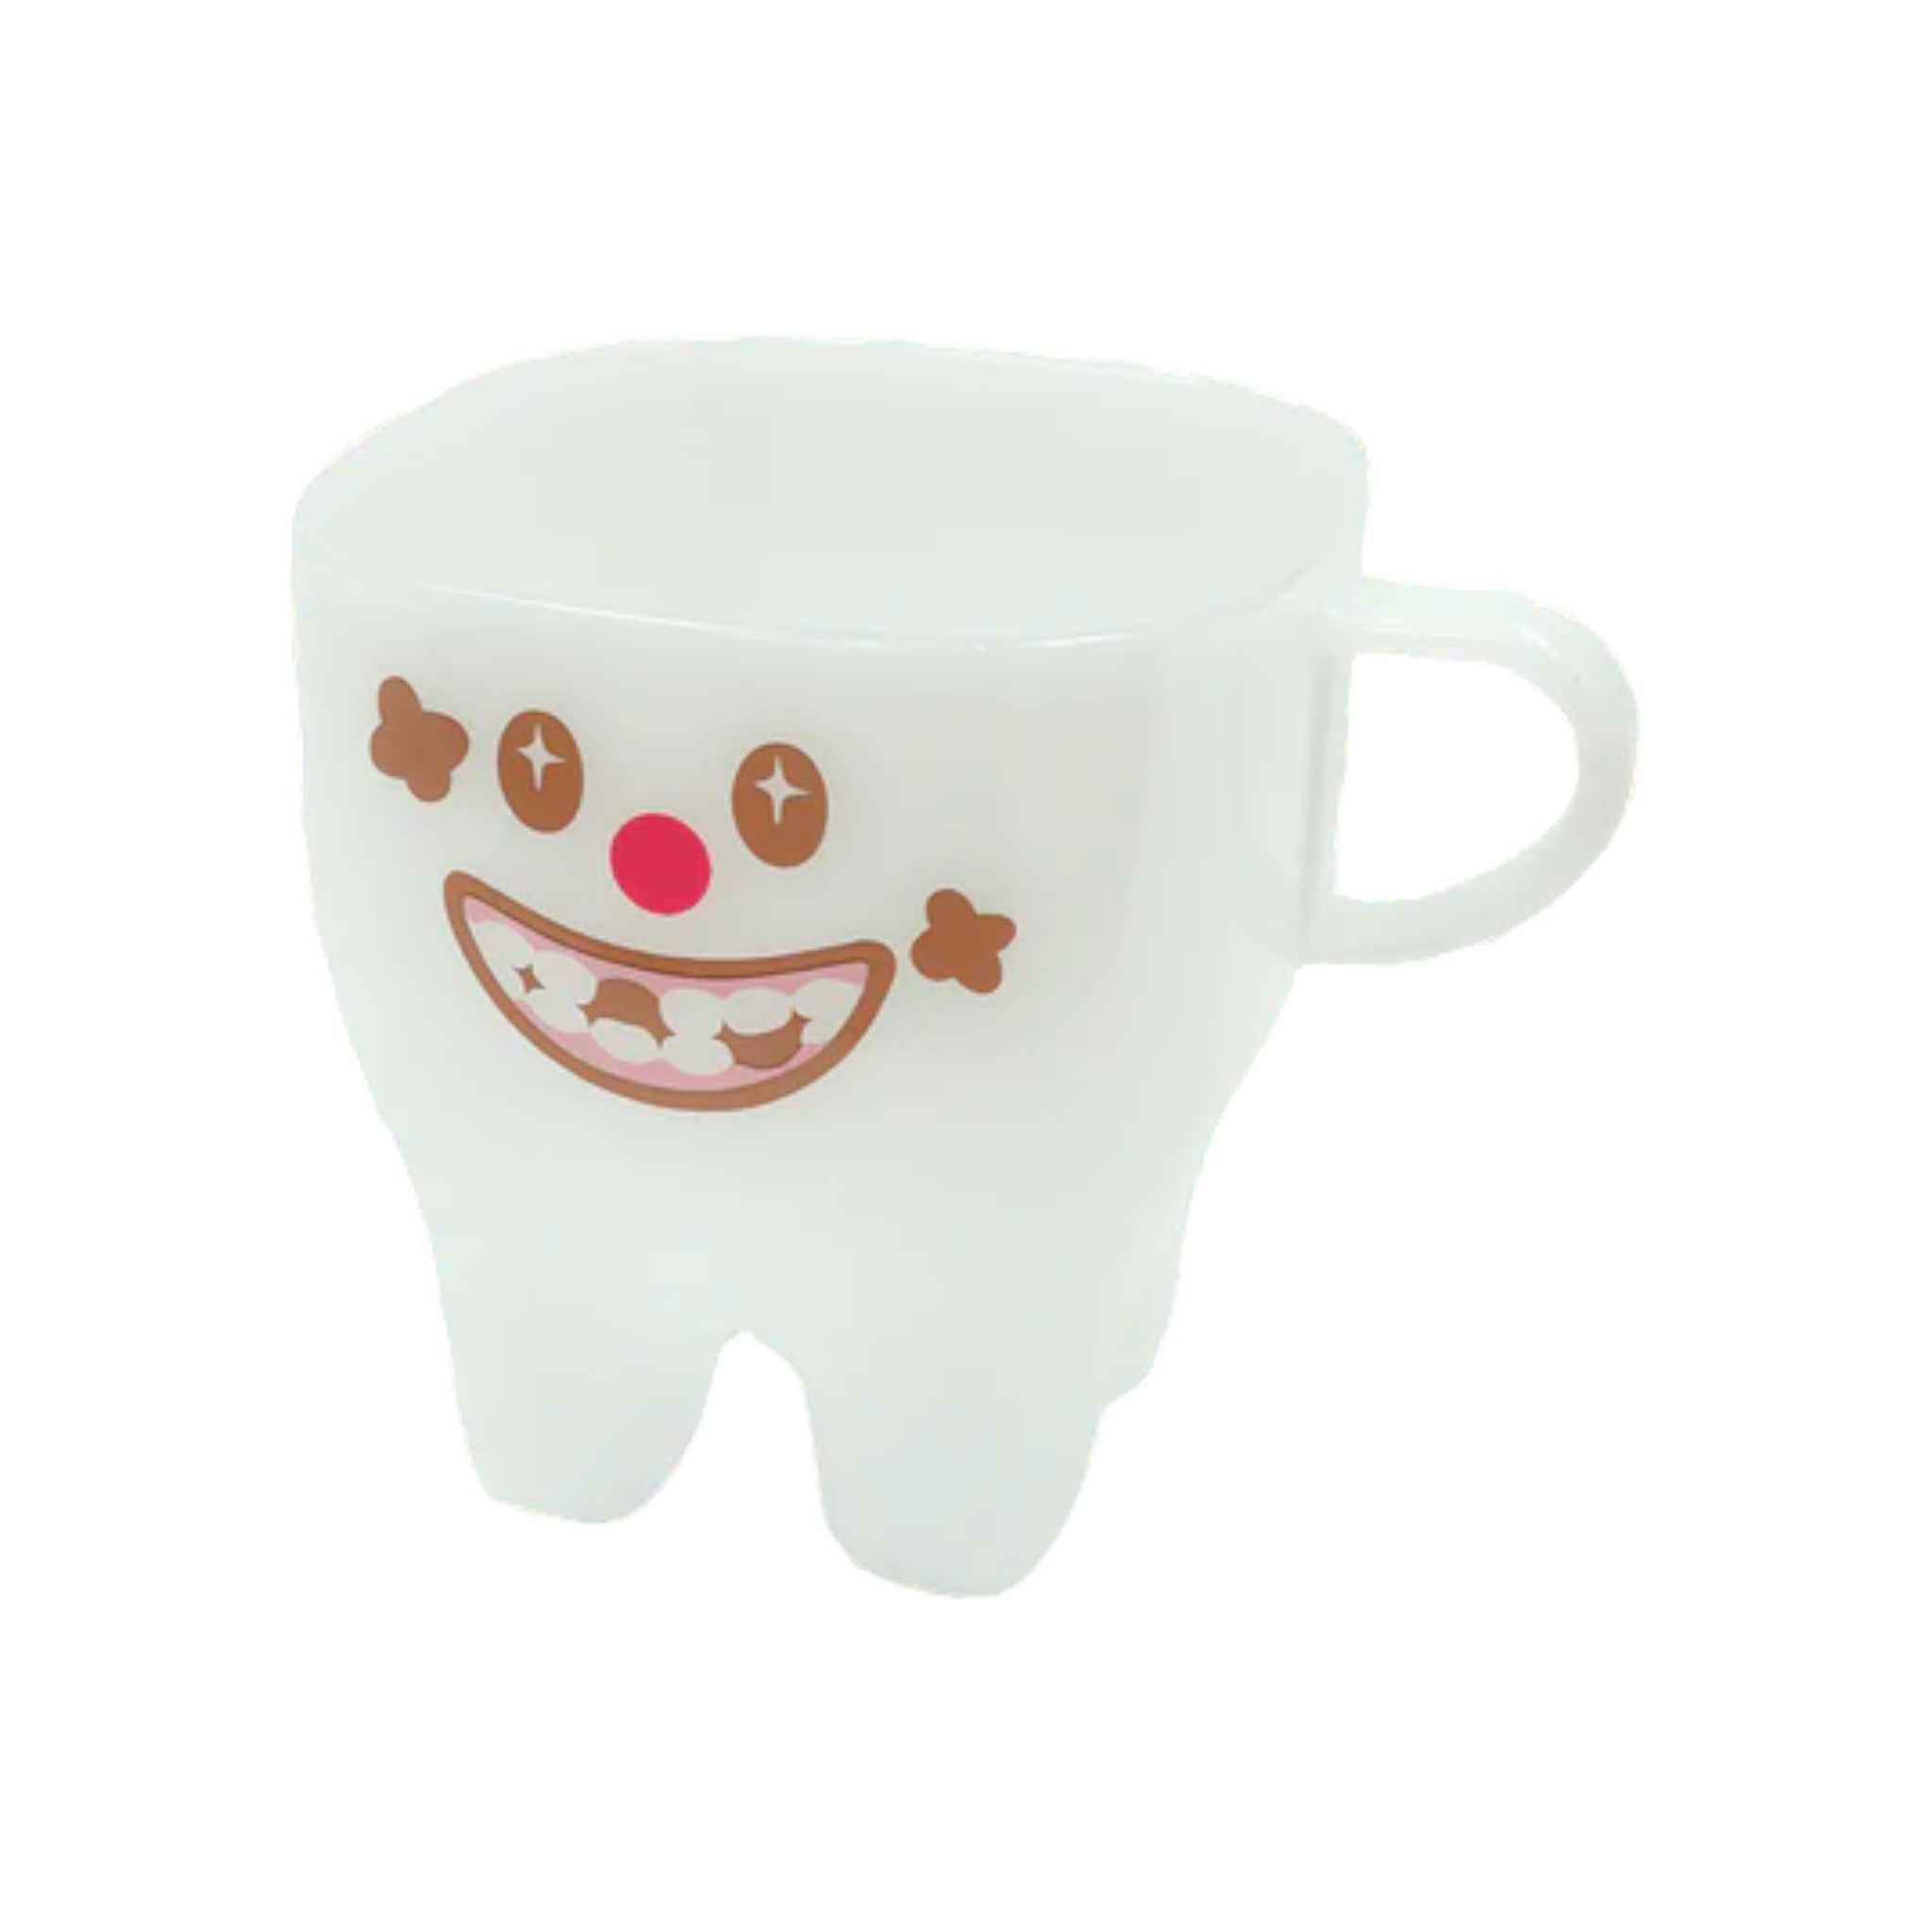 TOOTH PLASTIC CUP / DECAY